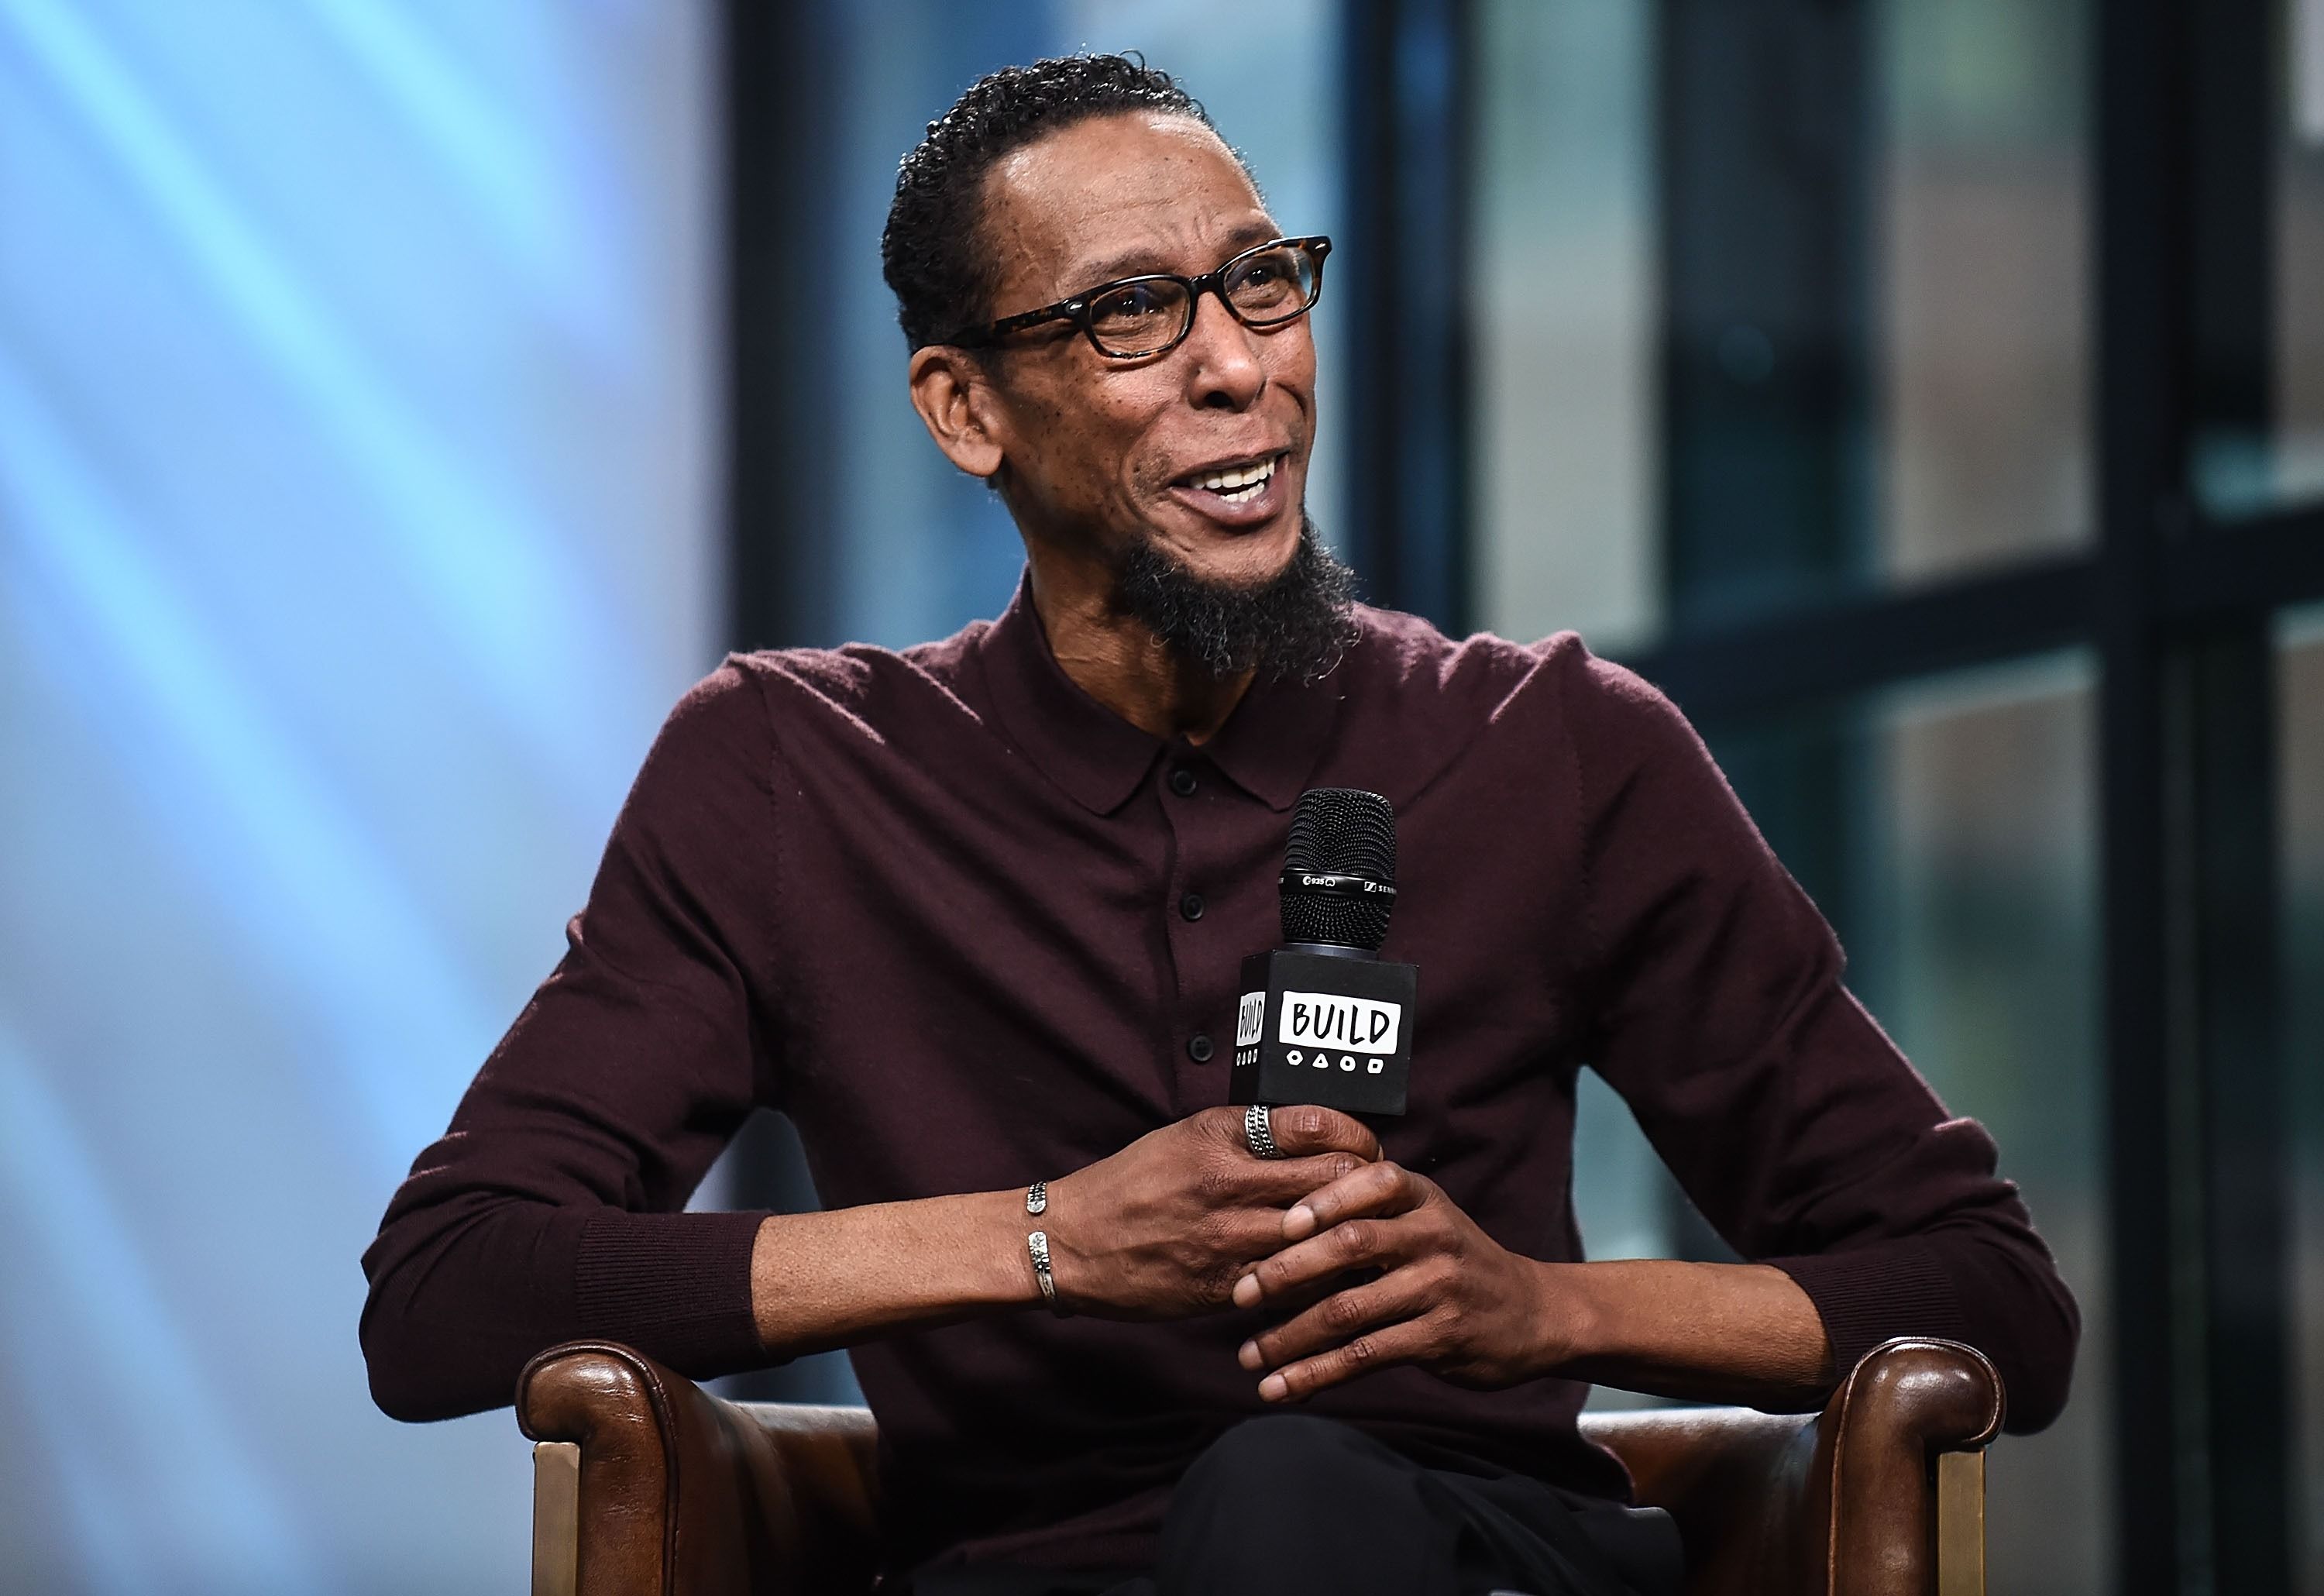 Ron Cephas Jones attends the Build Series to discuss the show 'This is Us' at Build Studio on May 16, 2017 in New York City. | Source: Getty Images